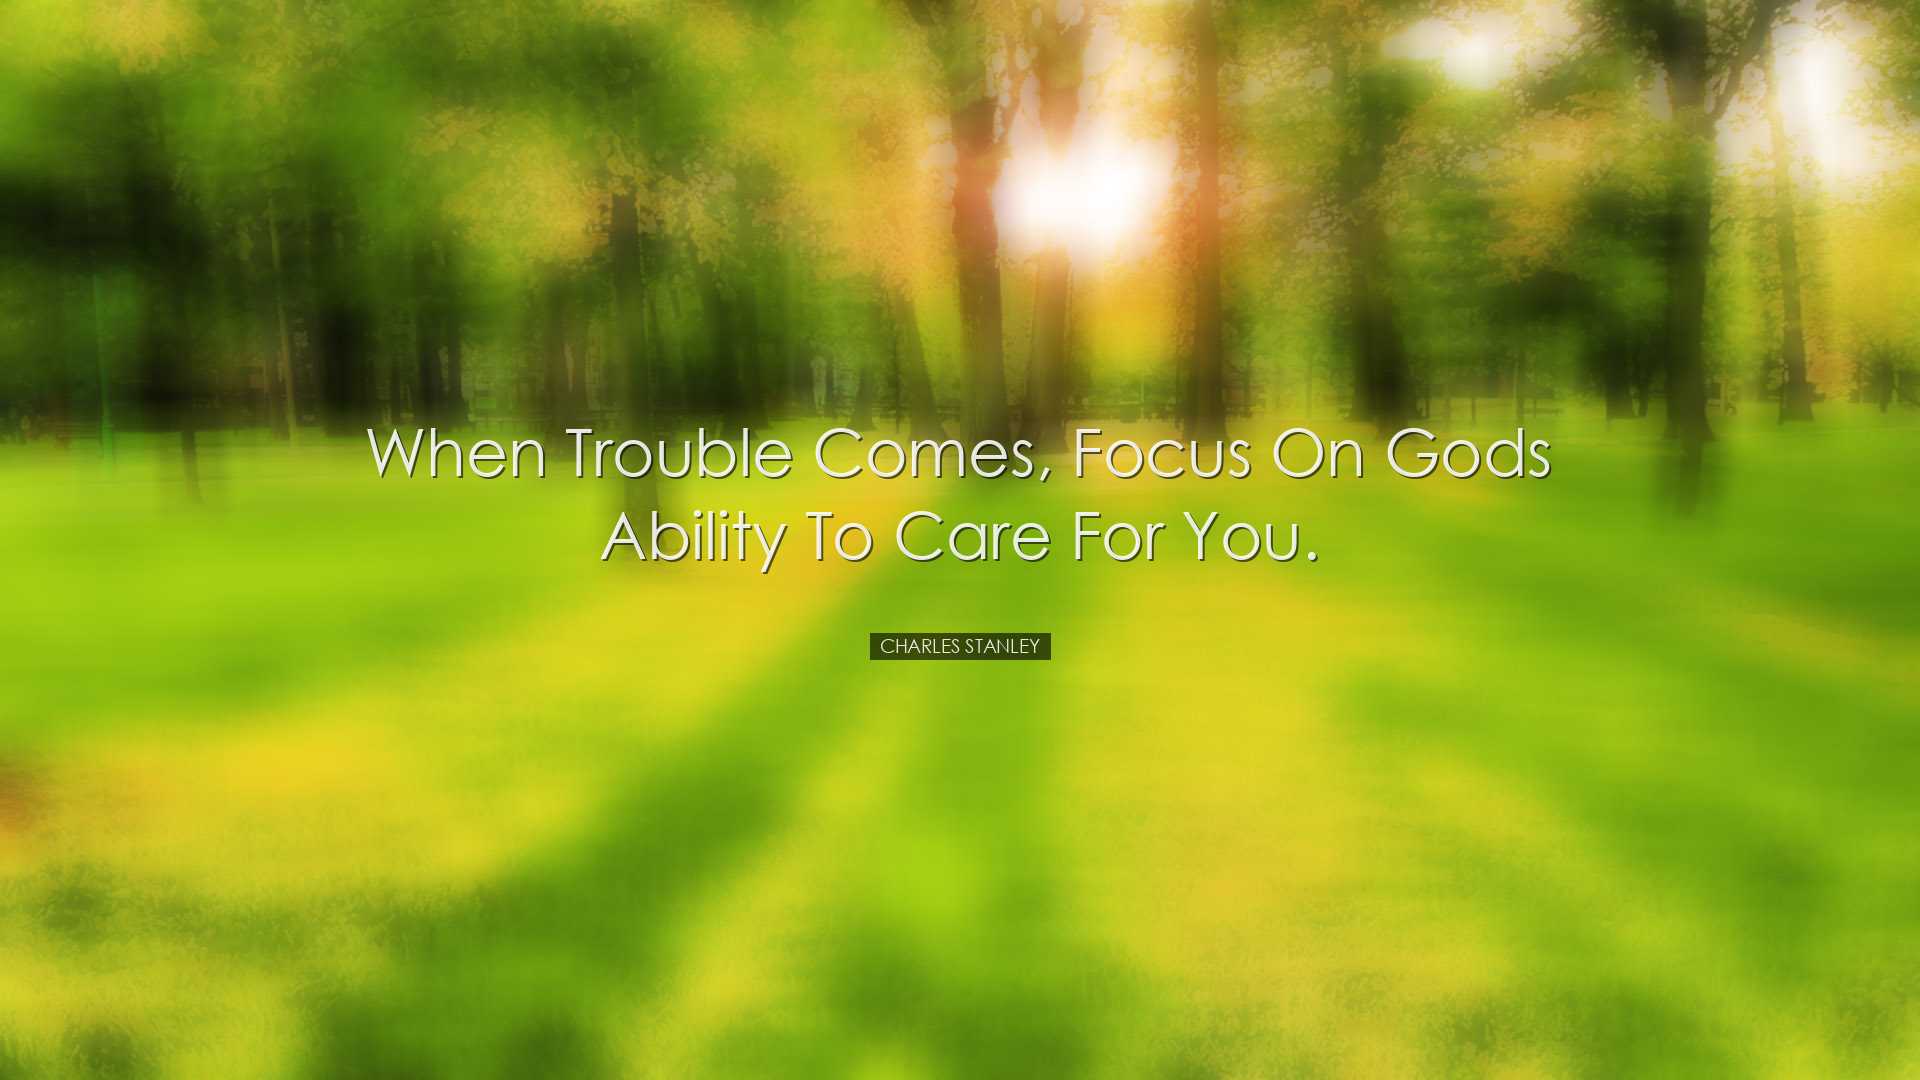 When trouble comes, focus on Gods ability to care for you. - Charl